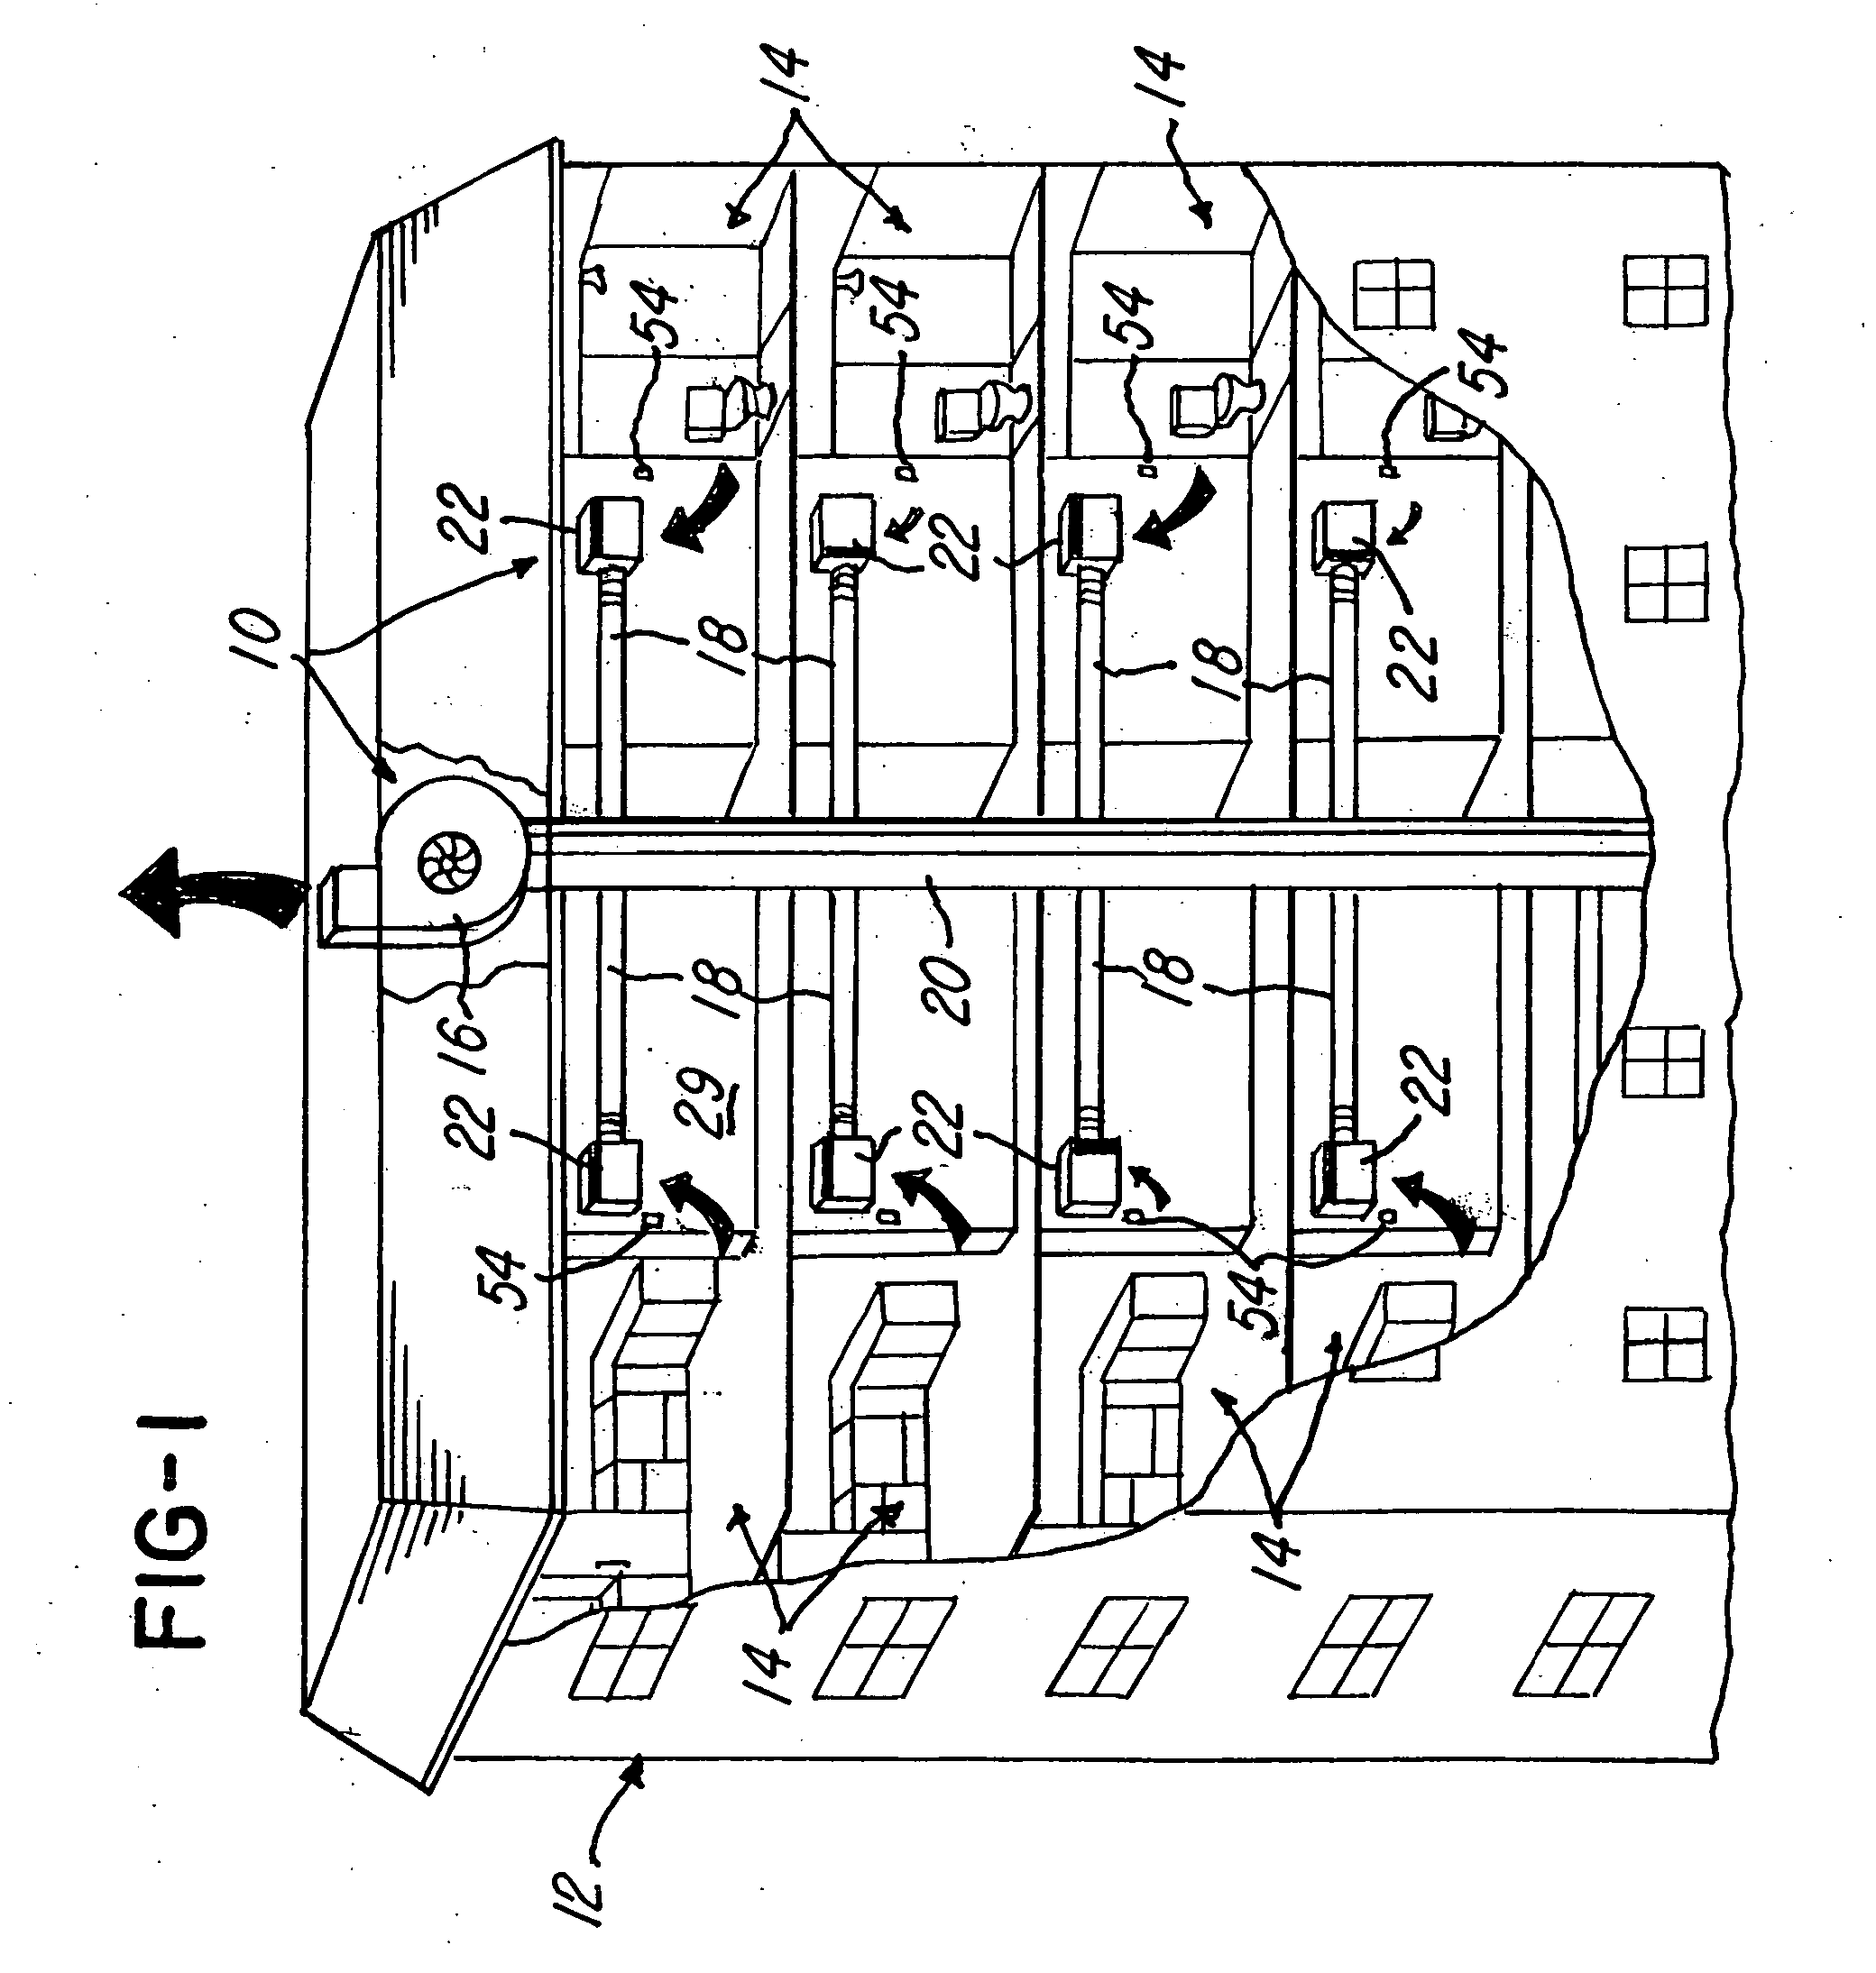 Method and apparatus for passively controlling airflow